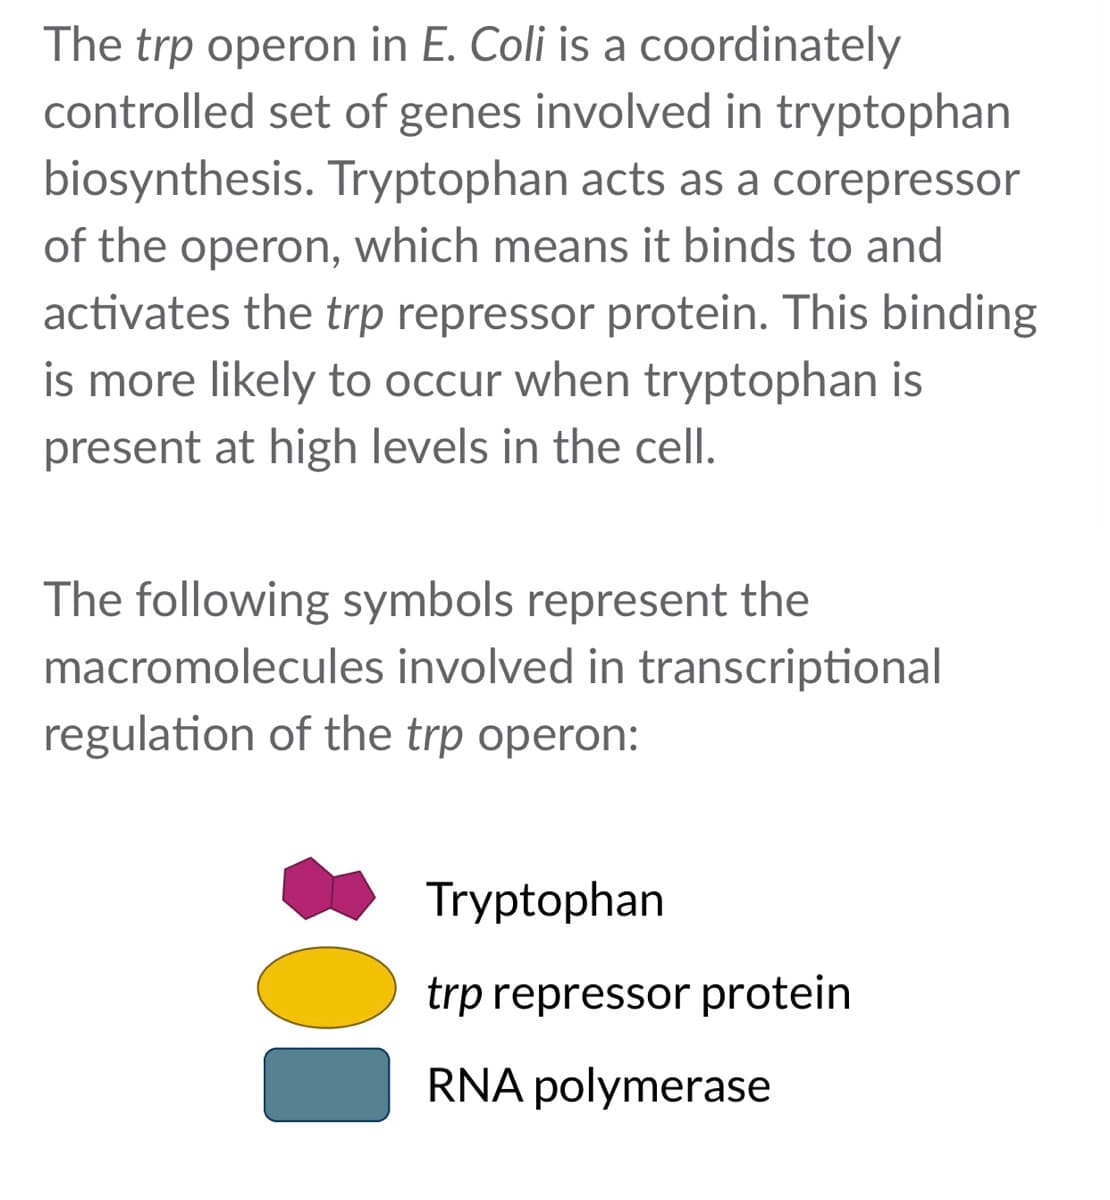 The trp operon in E. Coli is a coordinately
controlled set of genes involved in tryptophan
biosynthesis. Tryptophan acts as a corepressor
of the operon, which means it binds to and
activates the trp repressor protein. This binding
is more likely to occur when tryptophan is
present at high levels in the cell.
The following symbols represent the
macromolecules involved in transcriptional
regulation of the trp operon:
Tryptophan
trp repressor protein
RNA polymerase
